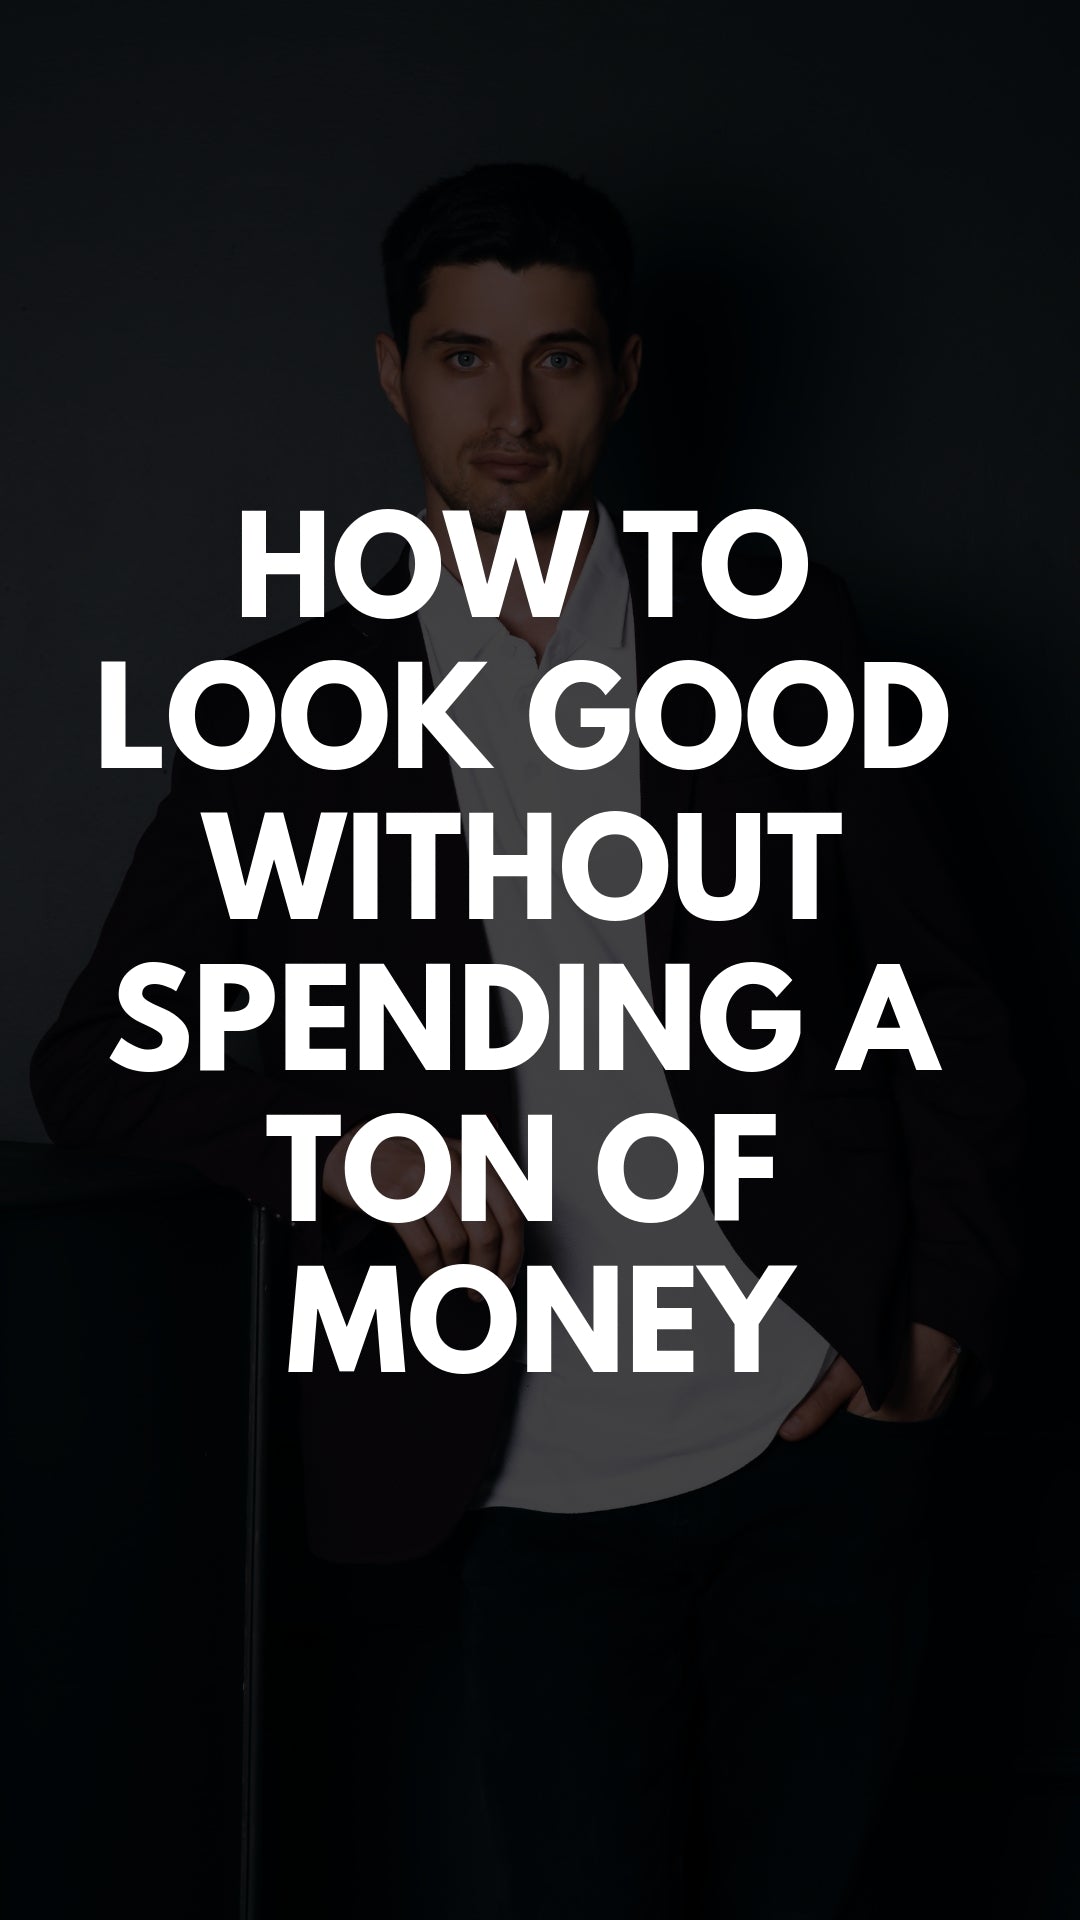 How To Dress Well On a Budget For Guys #fashiontips #styletips 